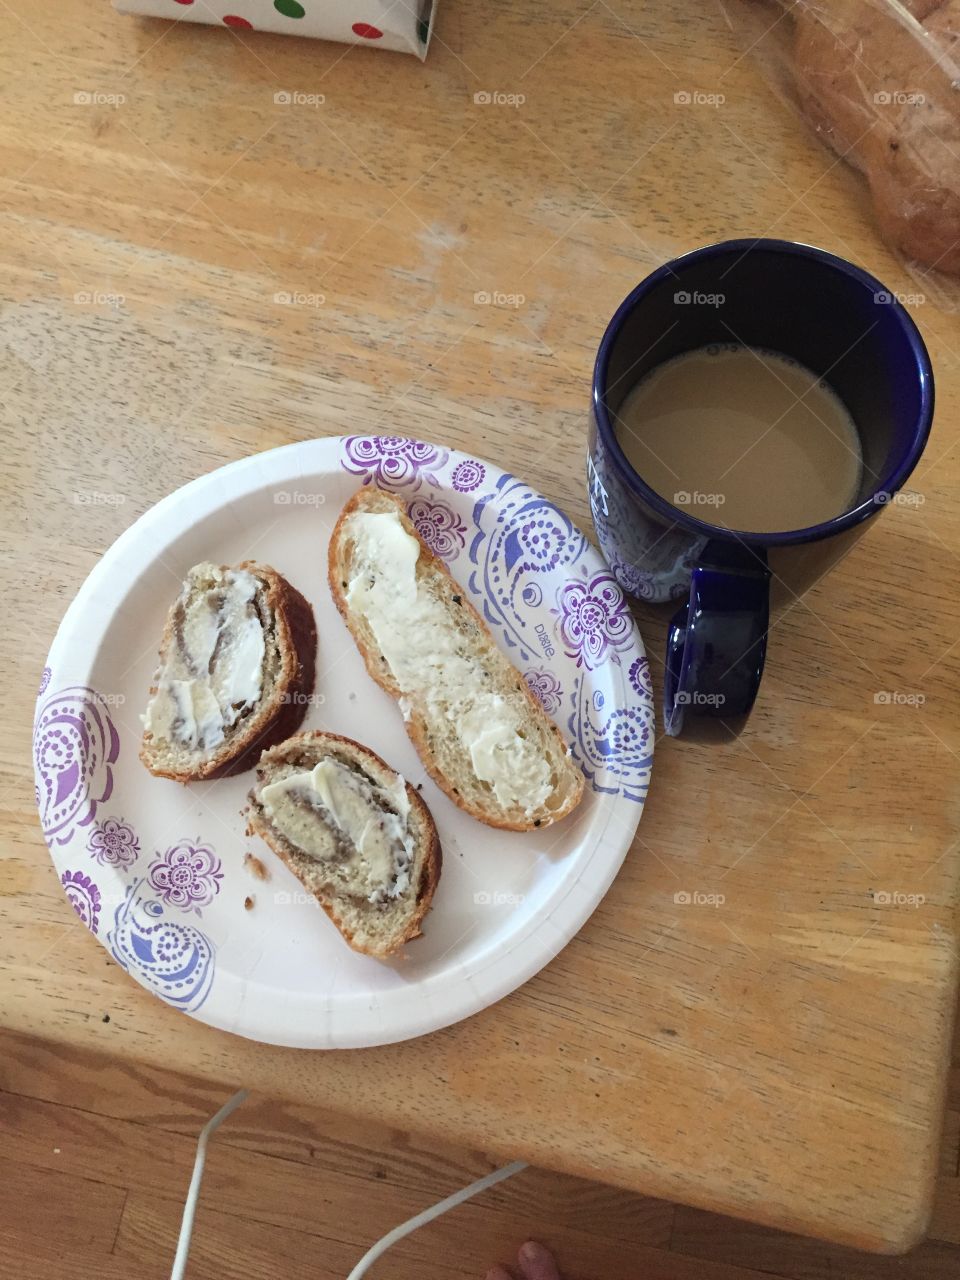 Christmas breakfast!  Hungarian Nut Roll, Swedish cardamom bread and coffee...the absolute best!